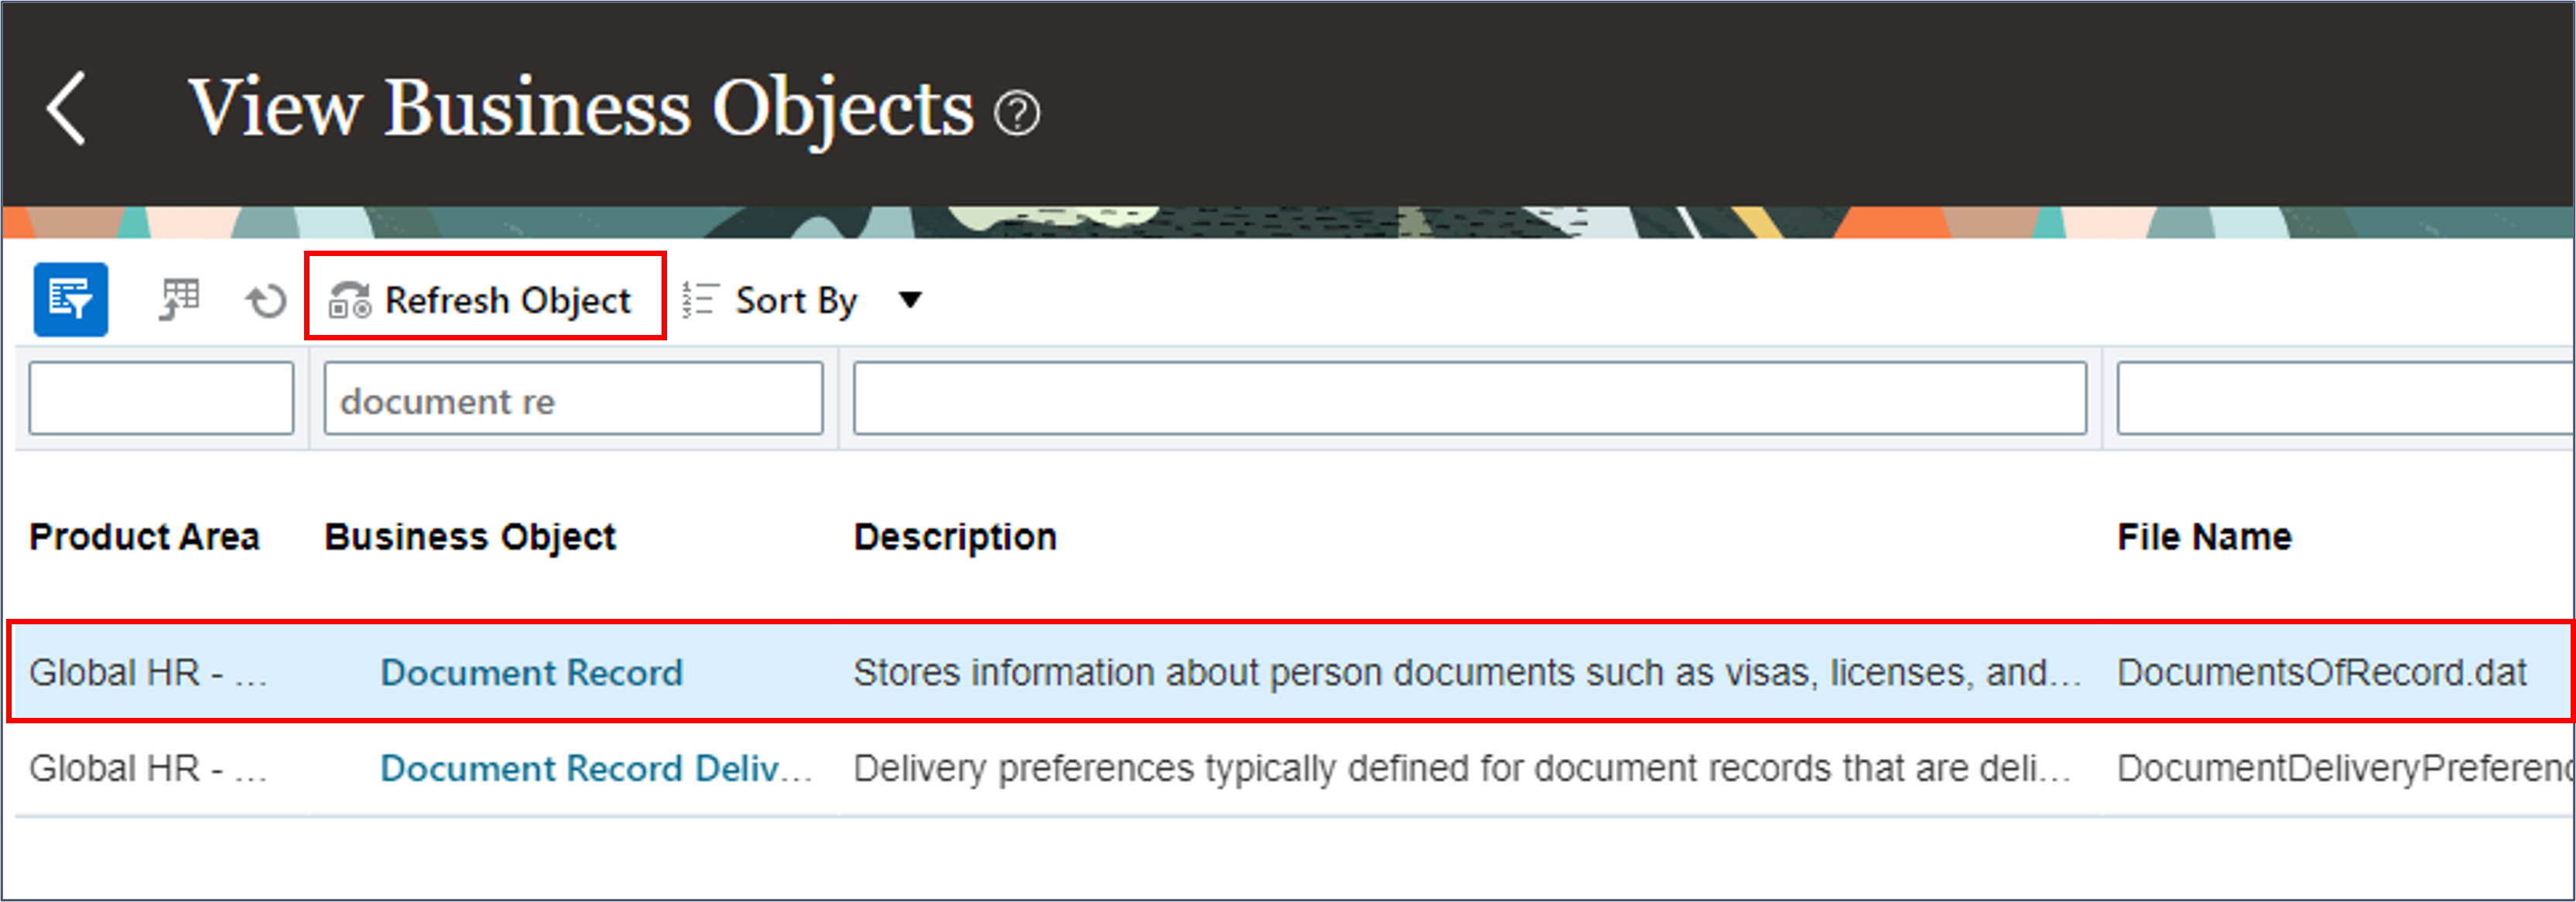 Use the query by example to search for Document Recor and click Refresh Object